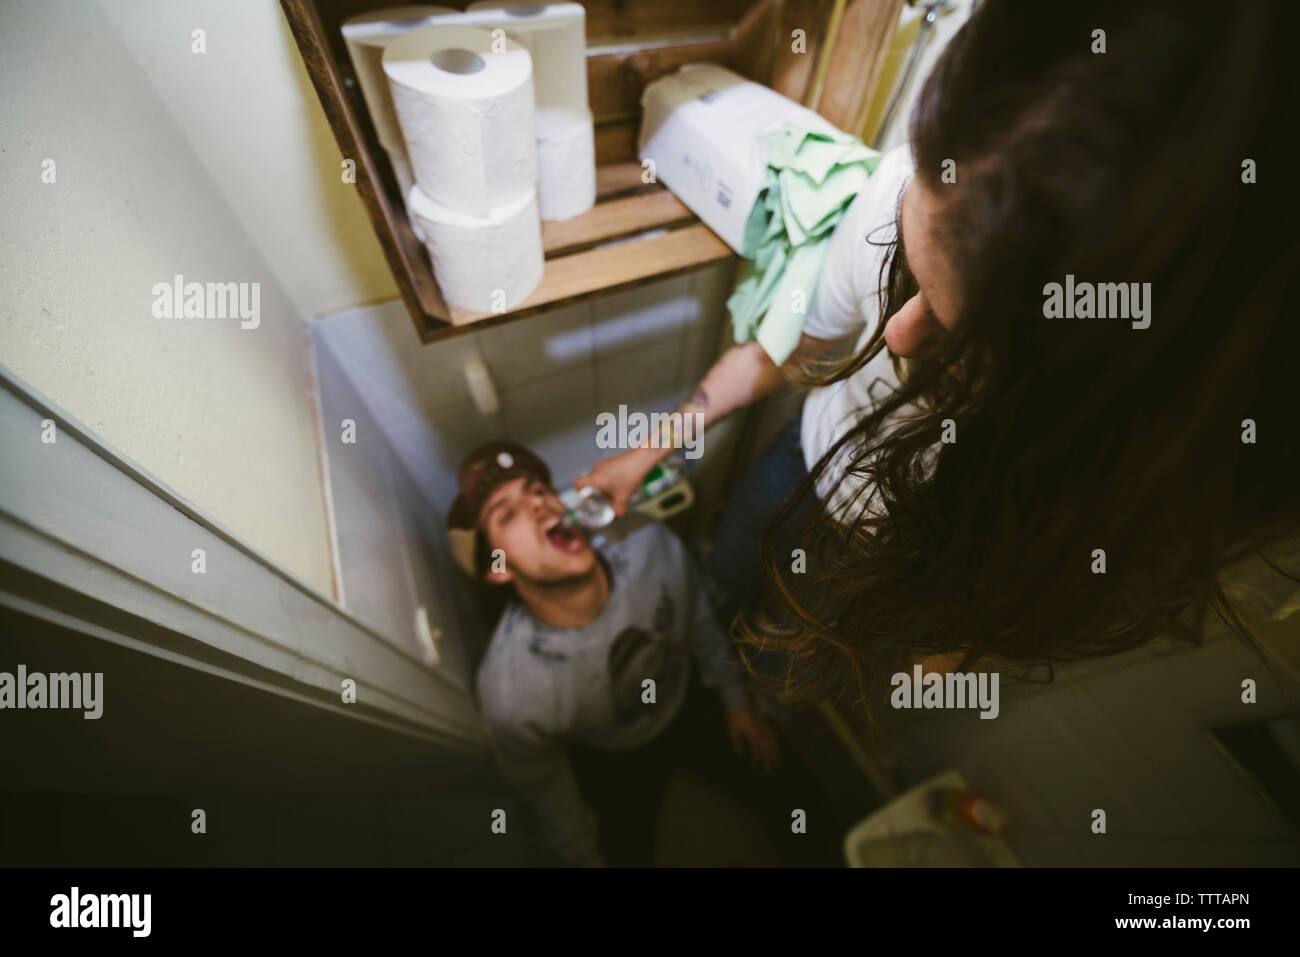 High angle view of woman feeding drinking water to man in bathroom Stock Photo